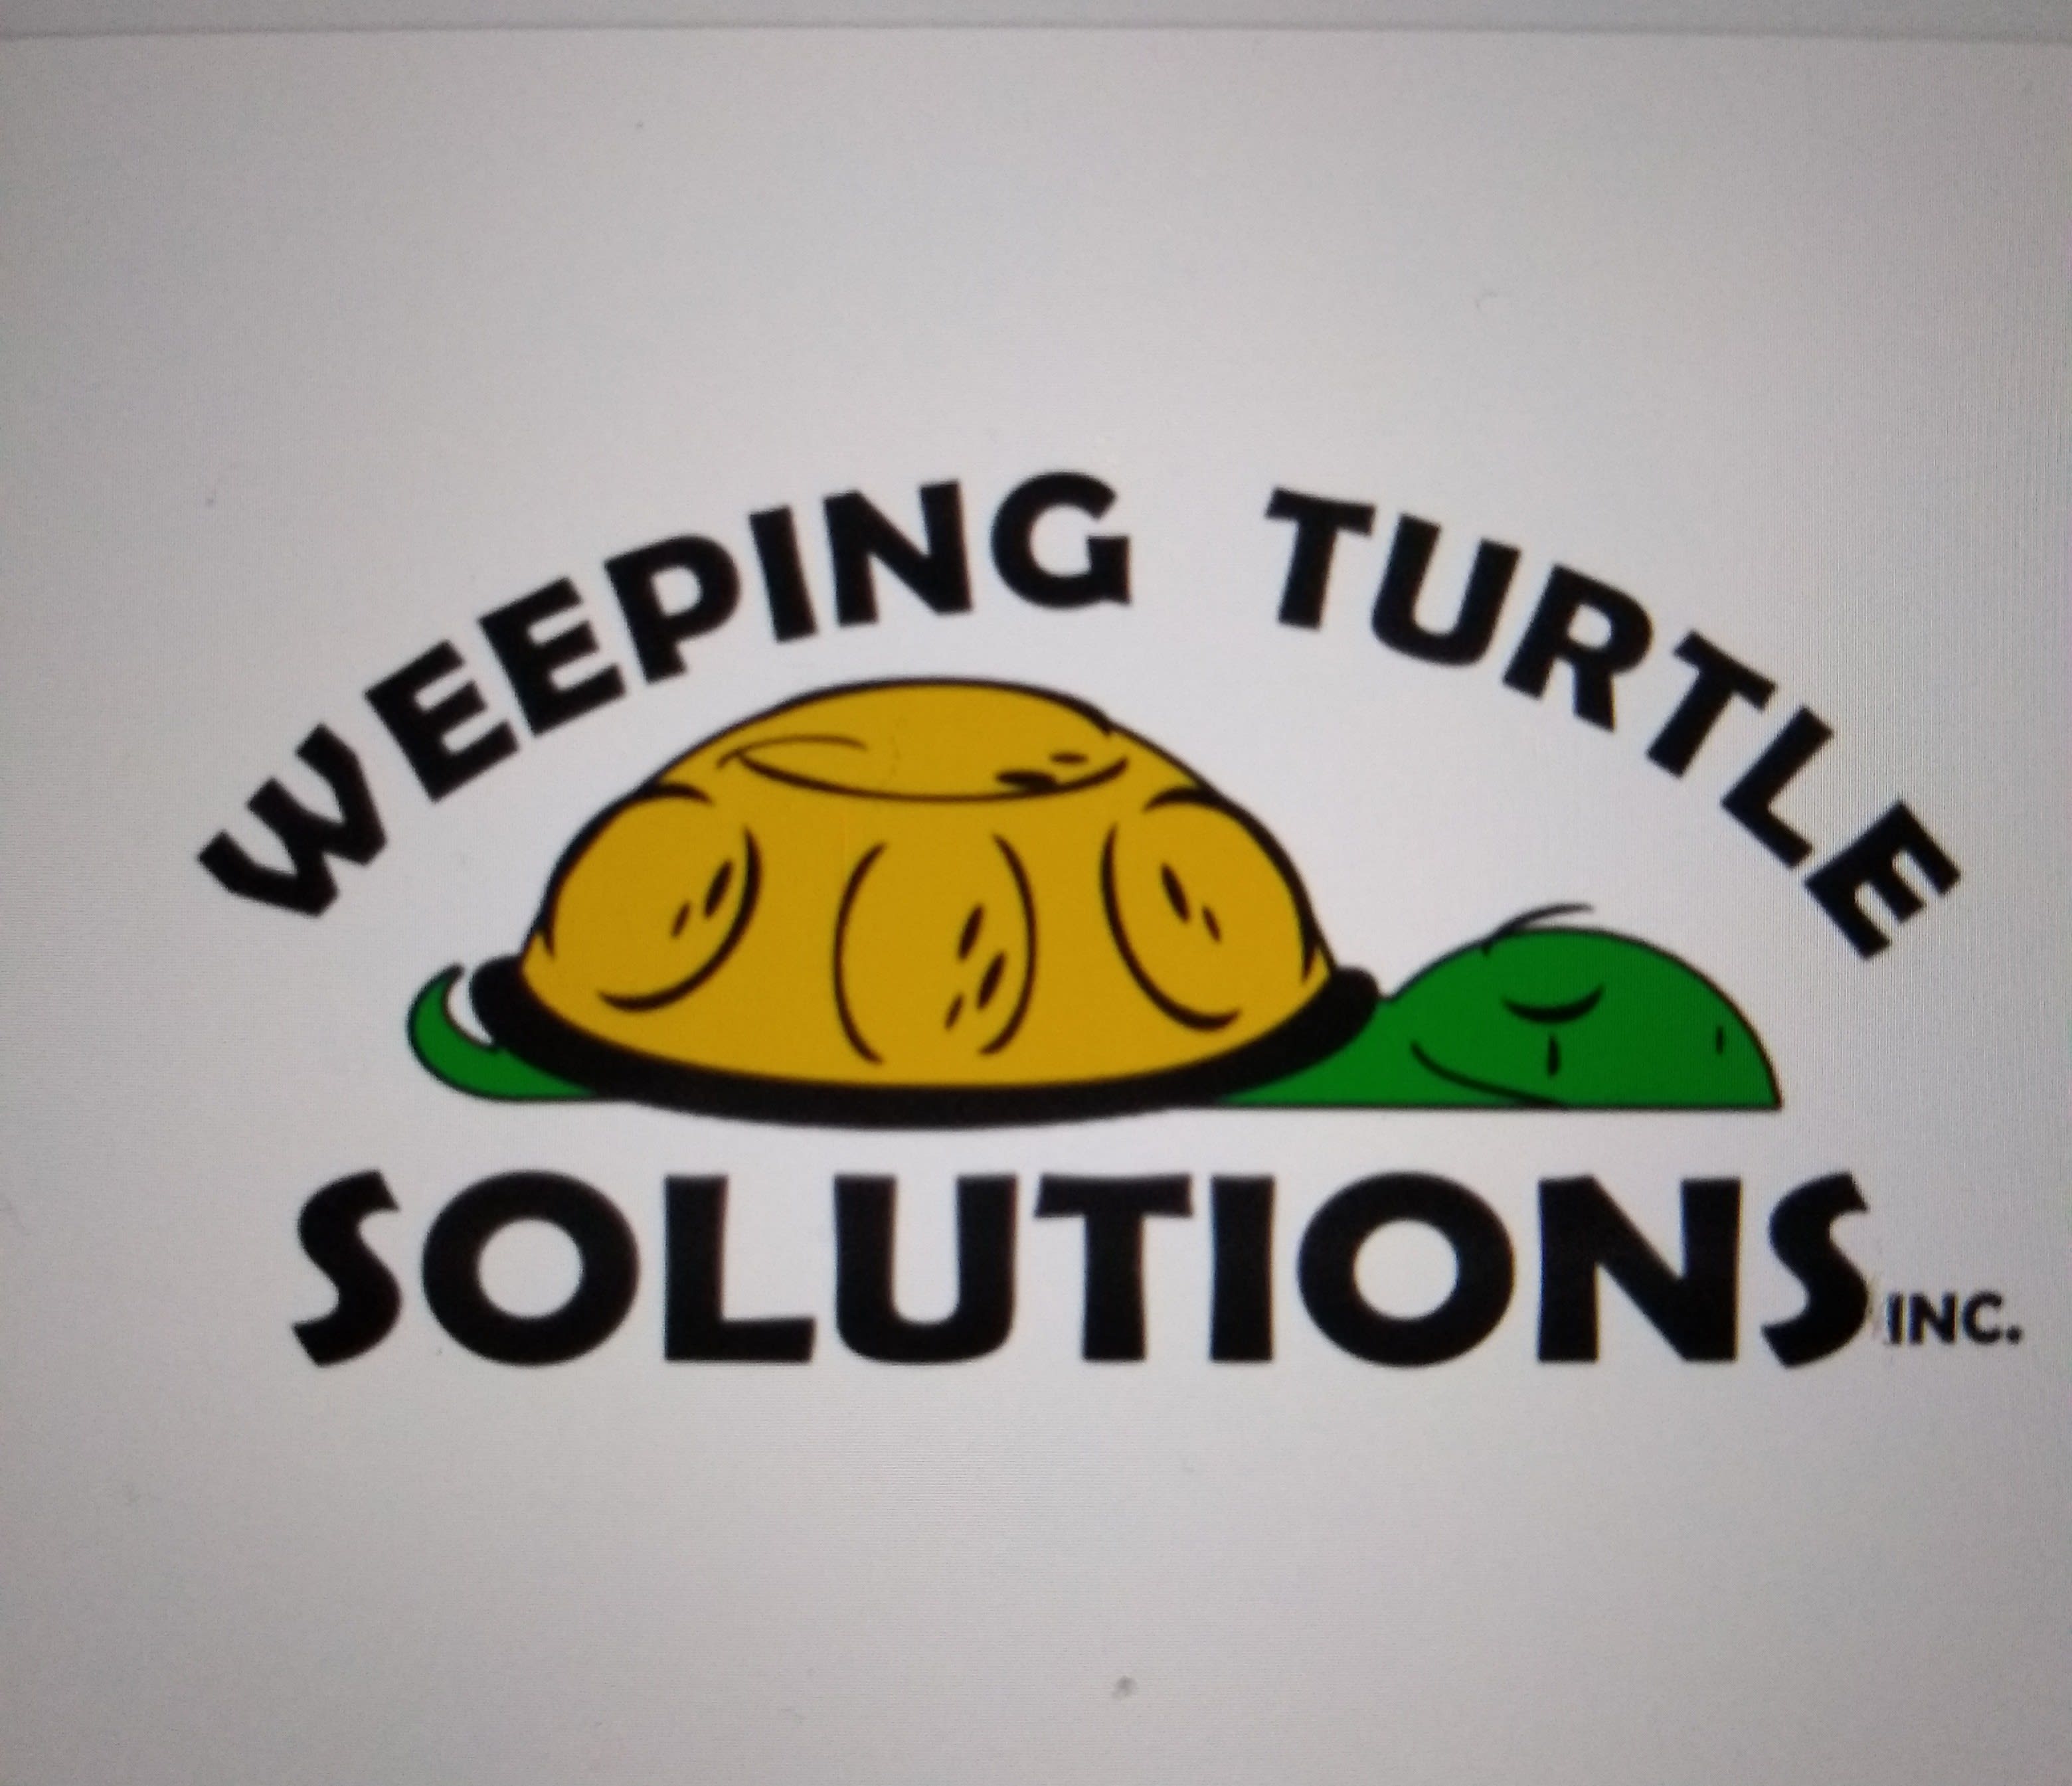 Weeping Turtle Solutions Cleaning co.